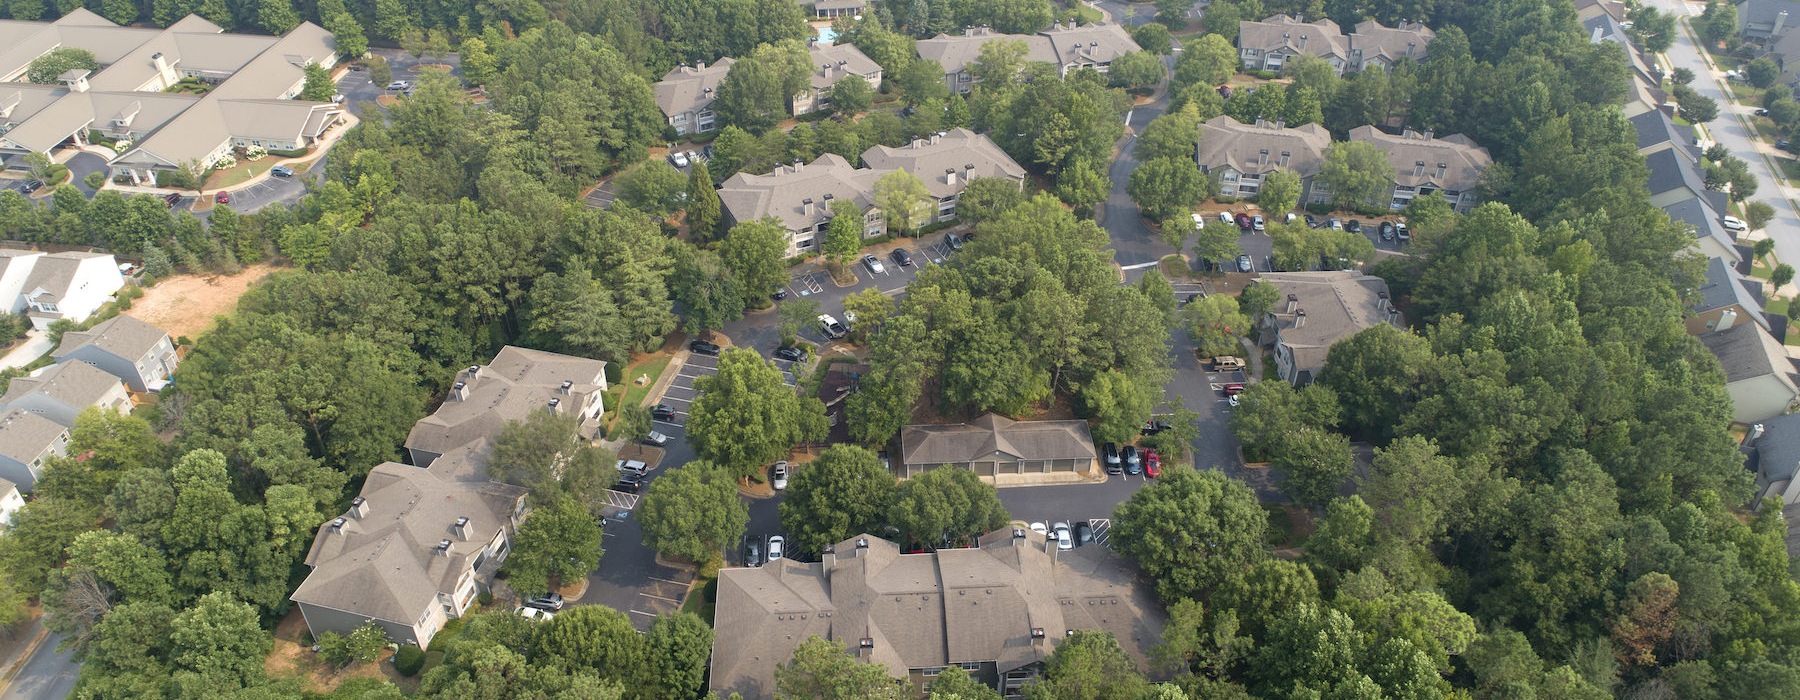 Arial View of Property and Surroundings